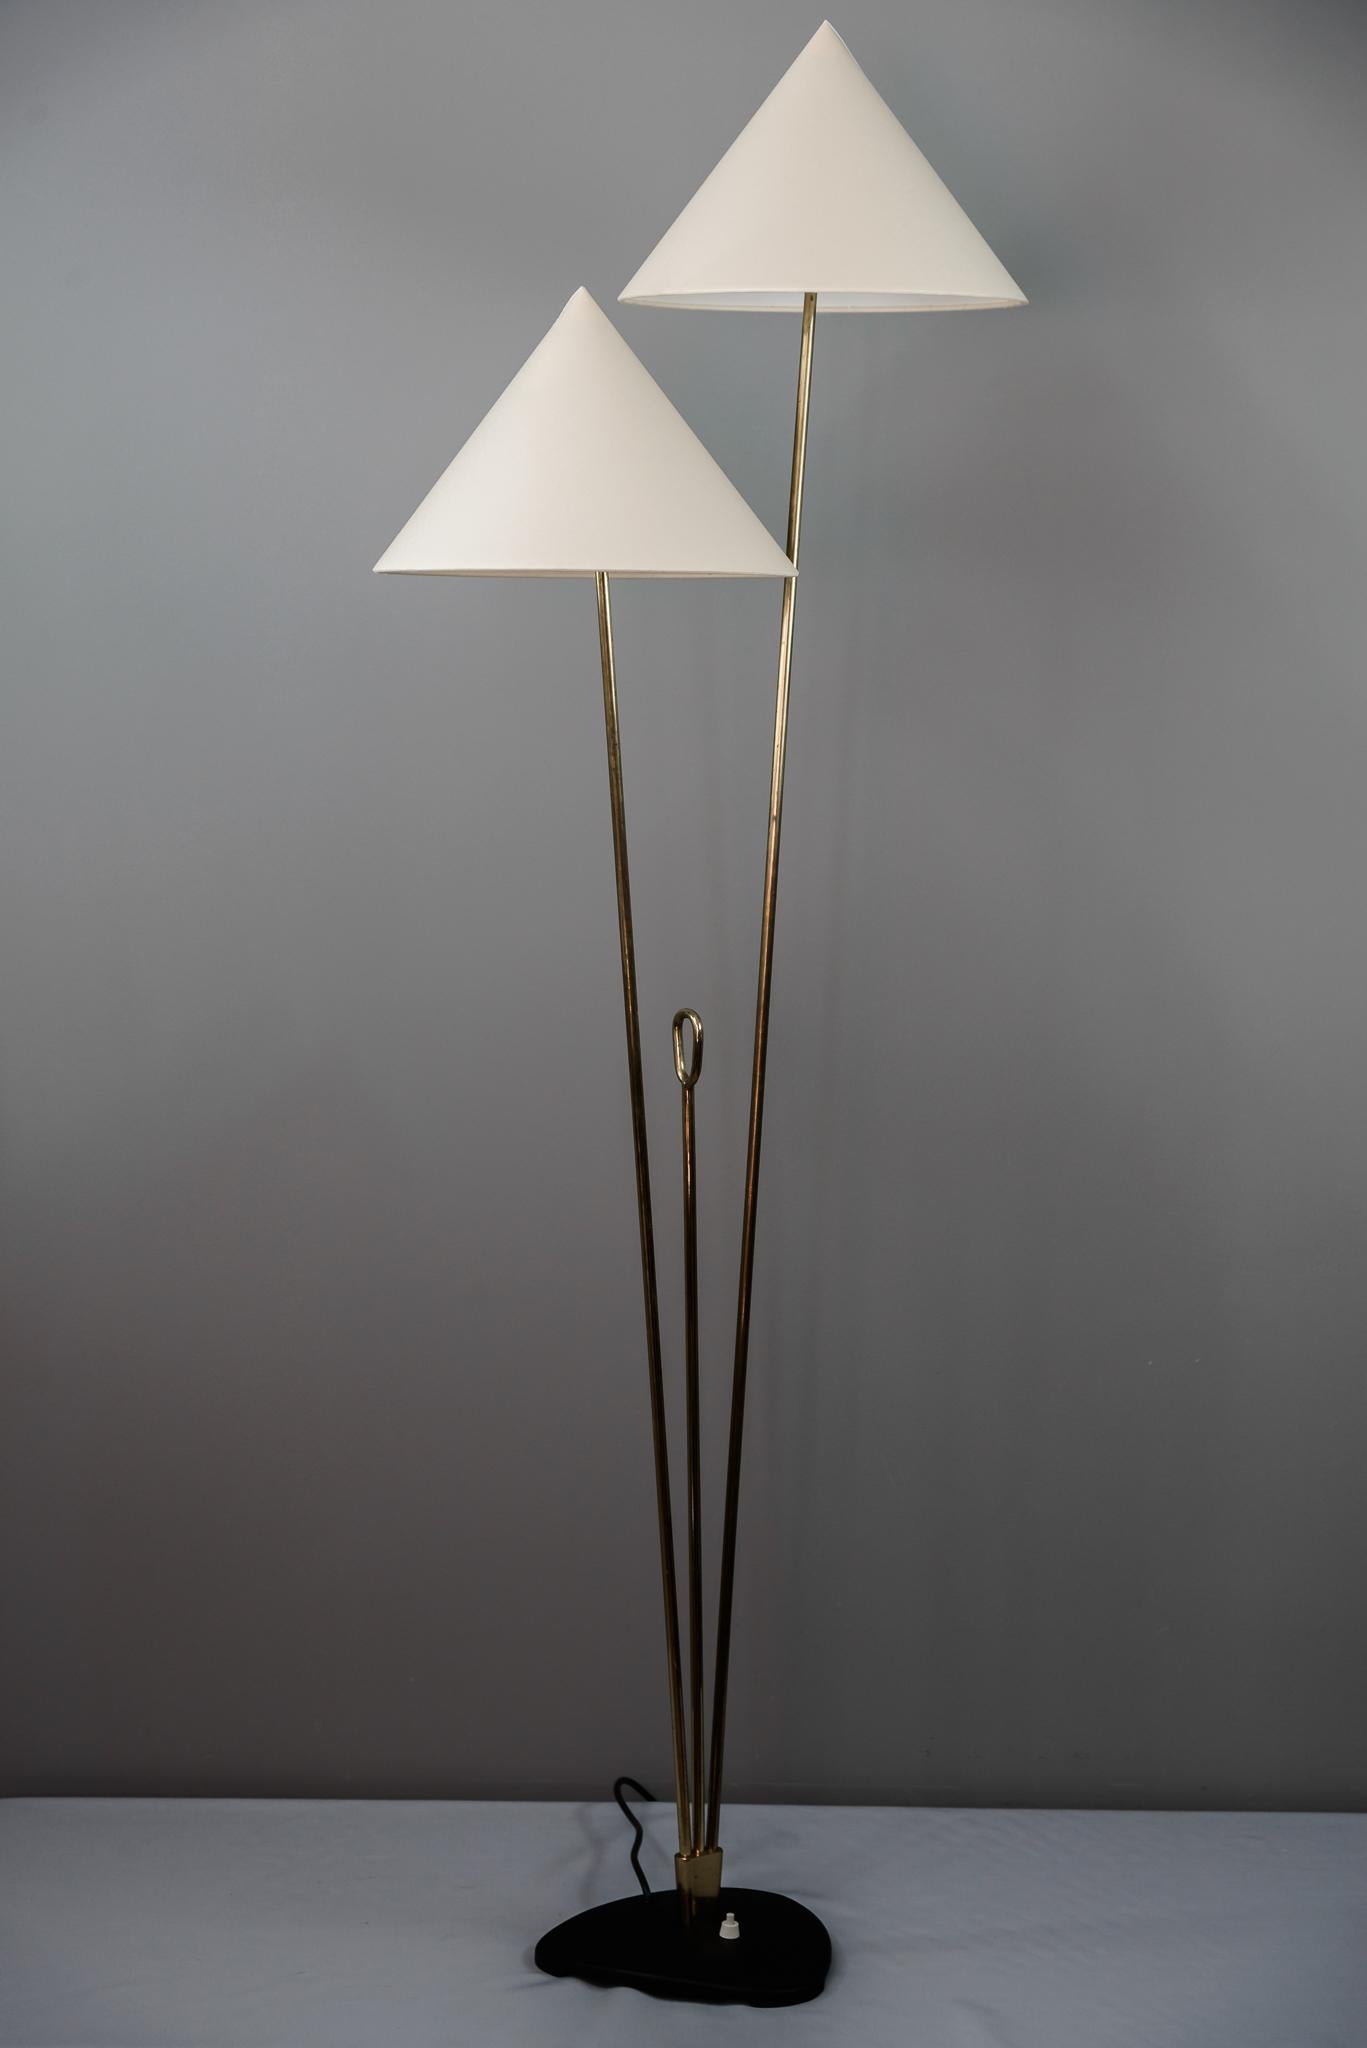 Brass floor lamp with lampshades by Rupert Nikoll, Vienna, Austria, manufactured in midcentury, circa 1960 (late 1950s or early 1960s). 
The stand is made of two brass rods in different lengths, a shorter brass rod with a handle.
The natural white